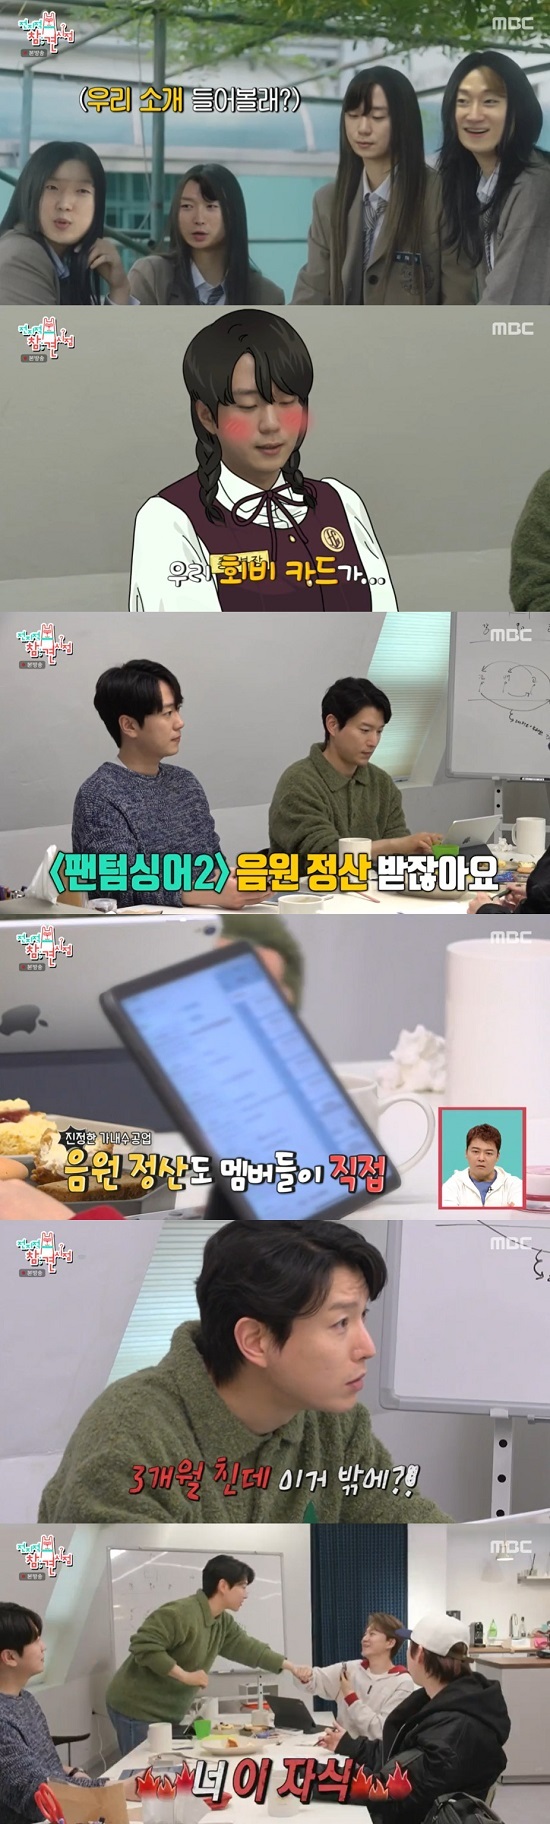 Forestella unveils practice room and Dues card cultureKo Woo-rim and Jo Kim Mingyu, members of the group Forestella, appeared in the MBC entertainment program Point of Omniscient Interfere, which aired on the 18th.On the same day, Forestella unveiled its practice room and Dues system.Forestellas manager said, I can see Stellar, said Forestella, who smiles at things that are not so bad. Hyung-ho is a boss-like Feelings, and Urim is an accountant and a resident.He added, Kim Mingyu is a talented entertainment manager, Feelings, and Doo-hoon is a member of the leading director, Feelings. Im just a homeroom teacher.Ko Woo-rim showed off his mothers face by cutting melons for his members during the Forestella meeting. Ko Woo-rim laughed when he said, Its Ko Woo-rim cutting melons during his introduction exercise.Forestella showed a professional appearance by directly meeting the stage line, etc., and managed the Dues card directly, revealing the aspect of domestic handicraft team.Kim Mingyu said, Its time to walk our dues, and Secretary Ko Woo-rim added, We have about 400,000 won left. Kim Mingyu said, We are receiving quarterly Phantom Singer 2 music revenues.I posted a business income book in a group chat room, he said.So, Doo-hoon and hyung-ho laughed at Kim Mingyu, saying, Is this the only income for three months? Do not you have to suspect embezzlement?Hyun-ho asked, Wait, did you do a private event and put it in? Kim Mingyu confessed, I have not put it in yet. Ko Woo-rim said, We put 1/10 of our personal profit into Dues.I want to have the righteousness of the team. Ko Woo-rim added, Now we are too family. Urim laughed at Kim Mingyus back, saying, I light my eyes.Photo = MBC broadcast screen